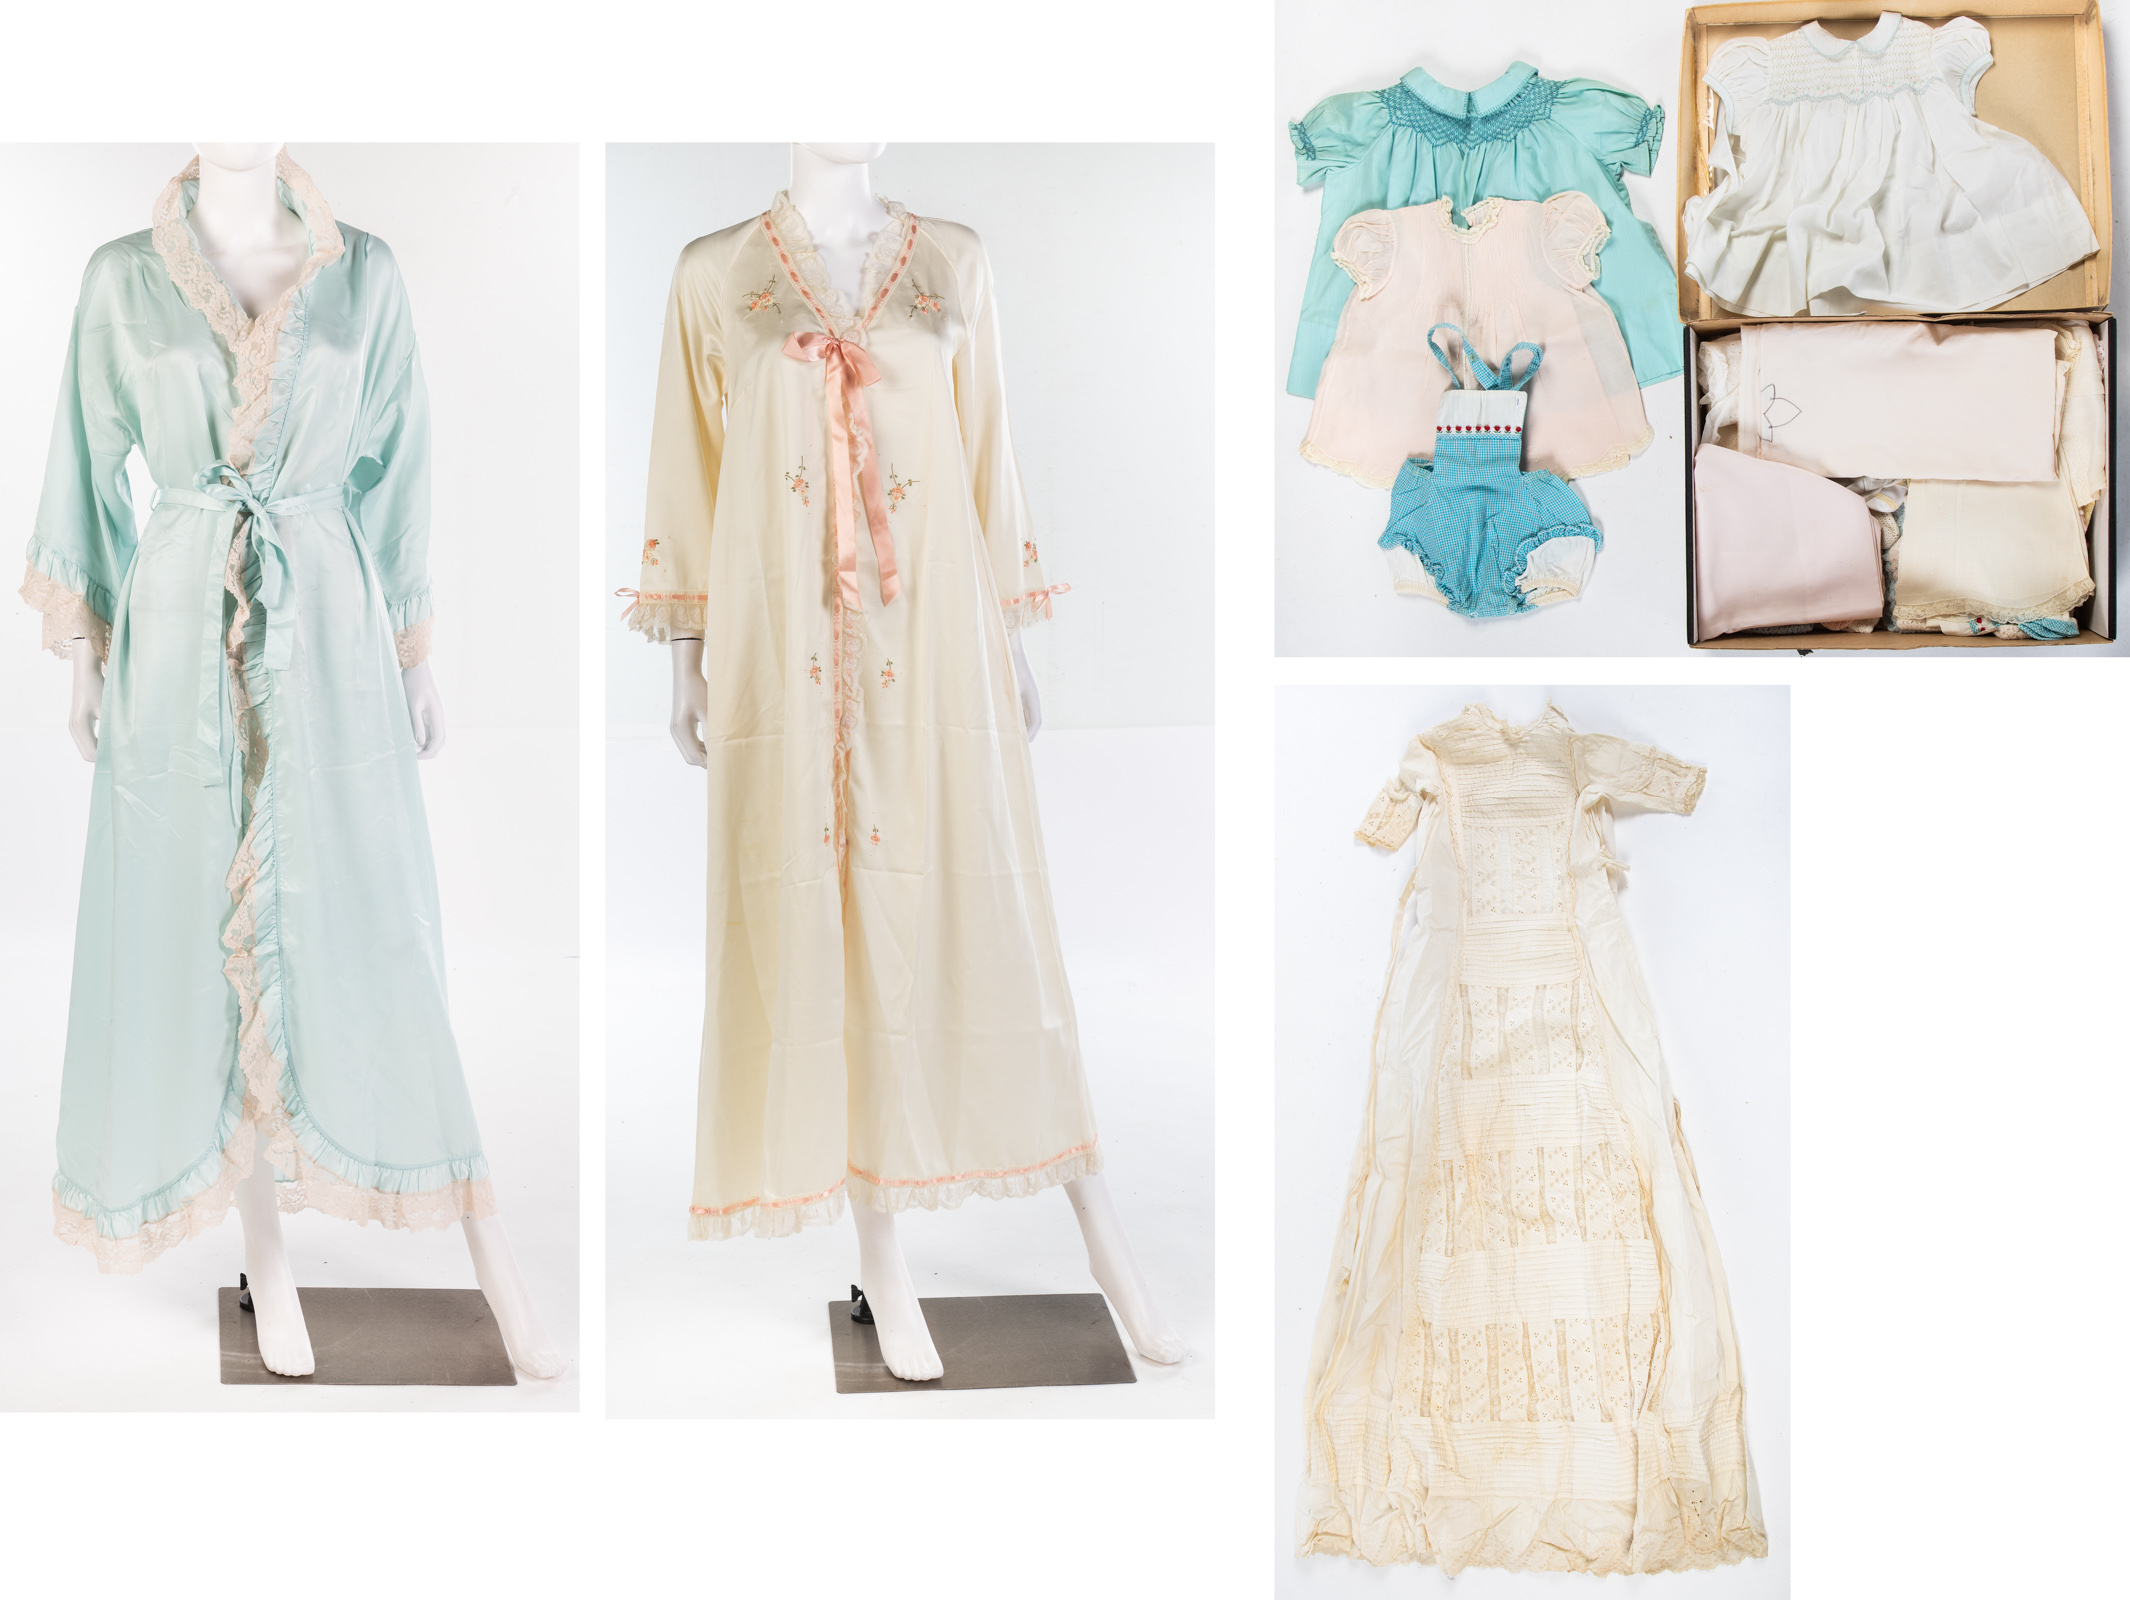 COLLECTION CHILDREN'S VINTAGE CLOTHING